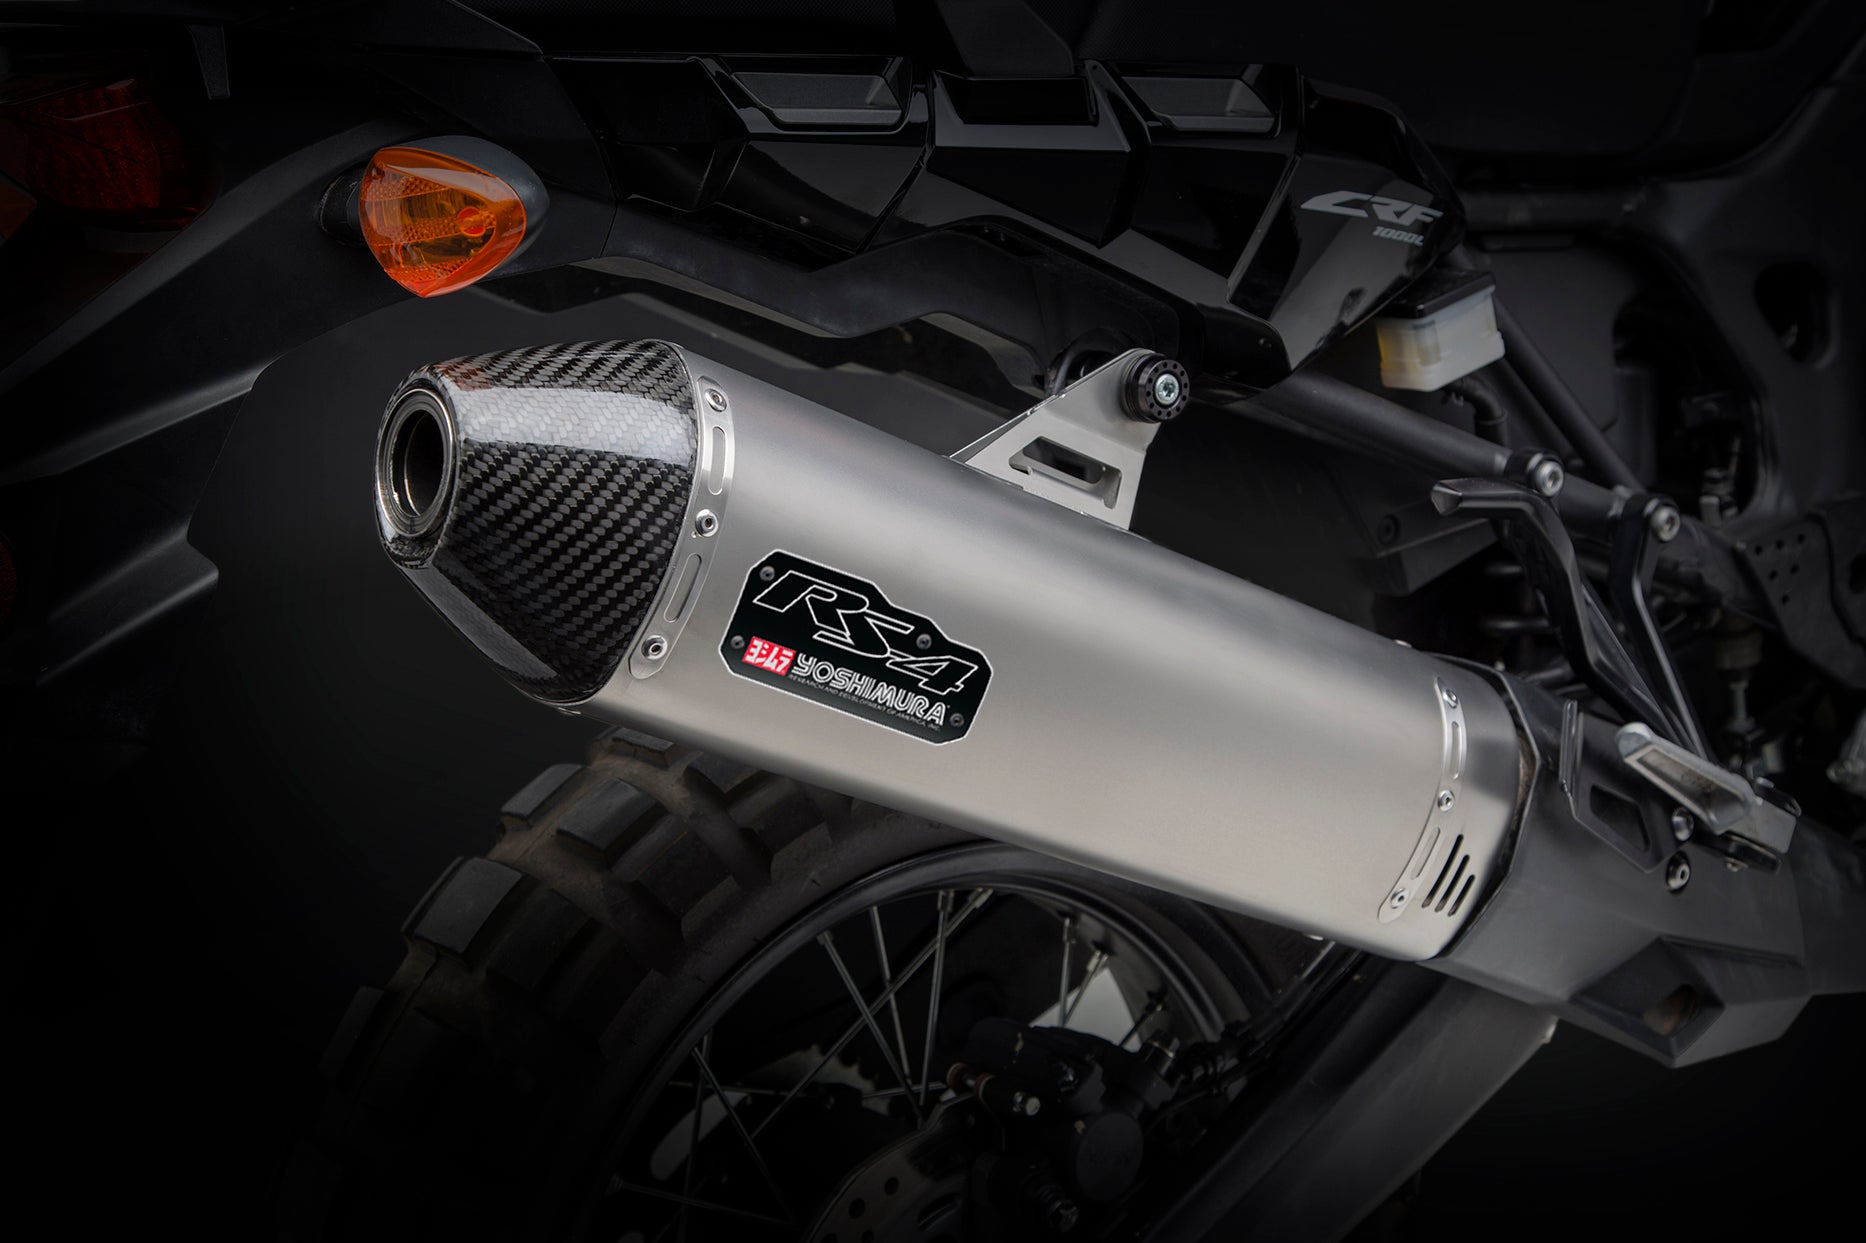 How to upgrade your bike with the slip-on exhaust in 15 minutes